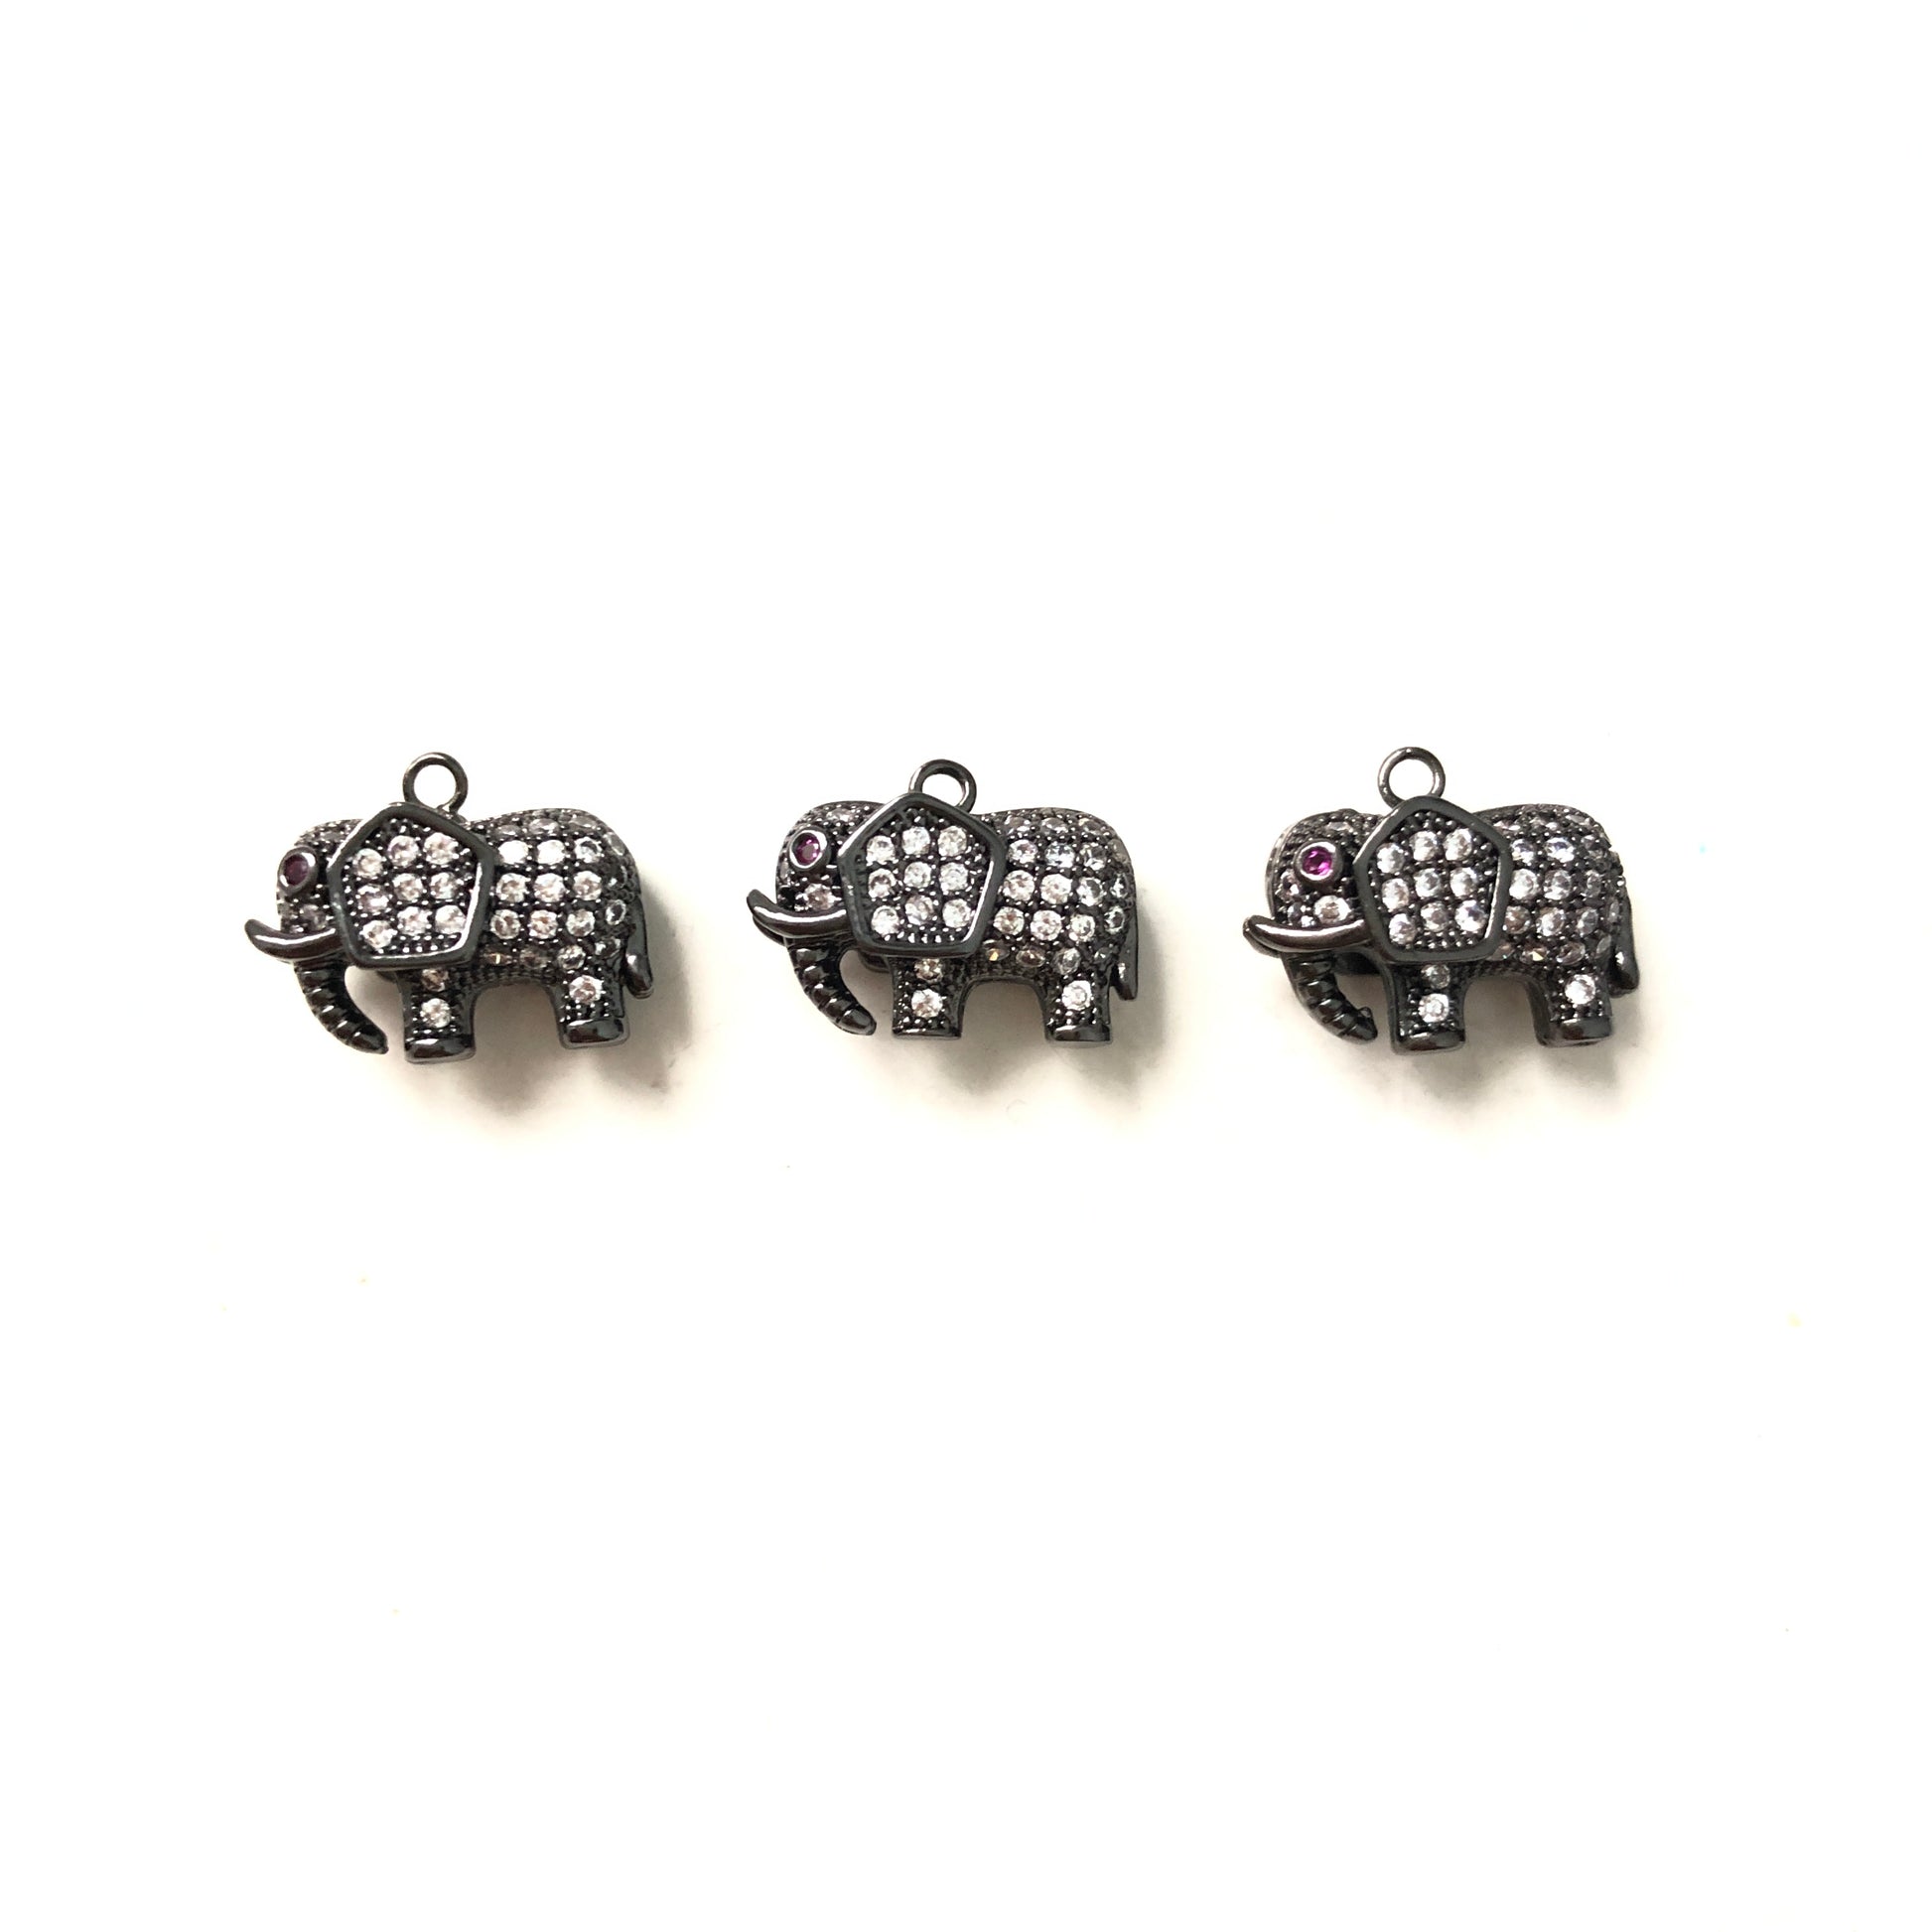 10pcs/lot 15*9mm CZ Paved Elephant Charms Black CZ Paved Charms Animals & Insects Small Sizes Charms Beads Beyond